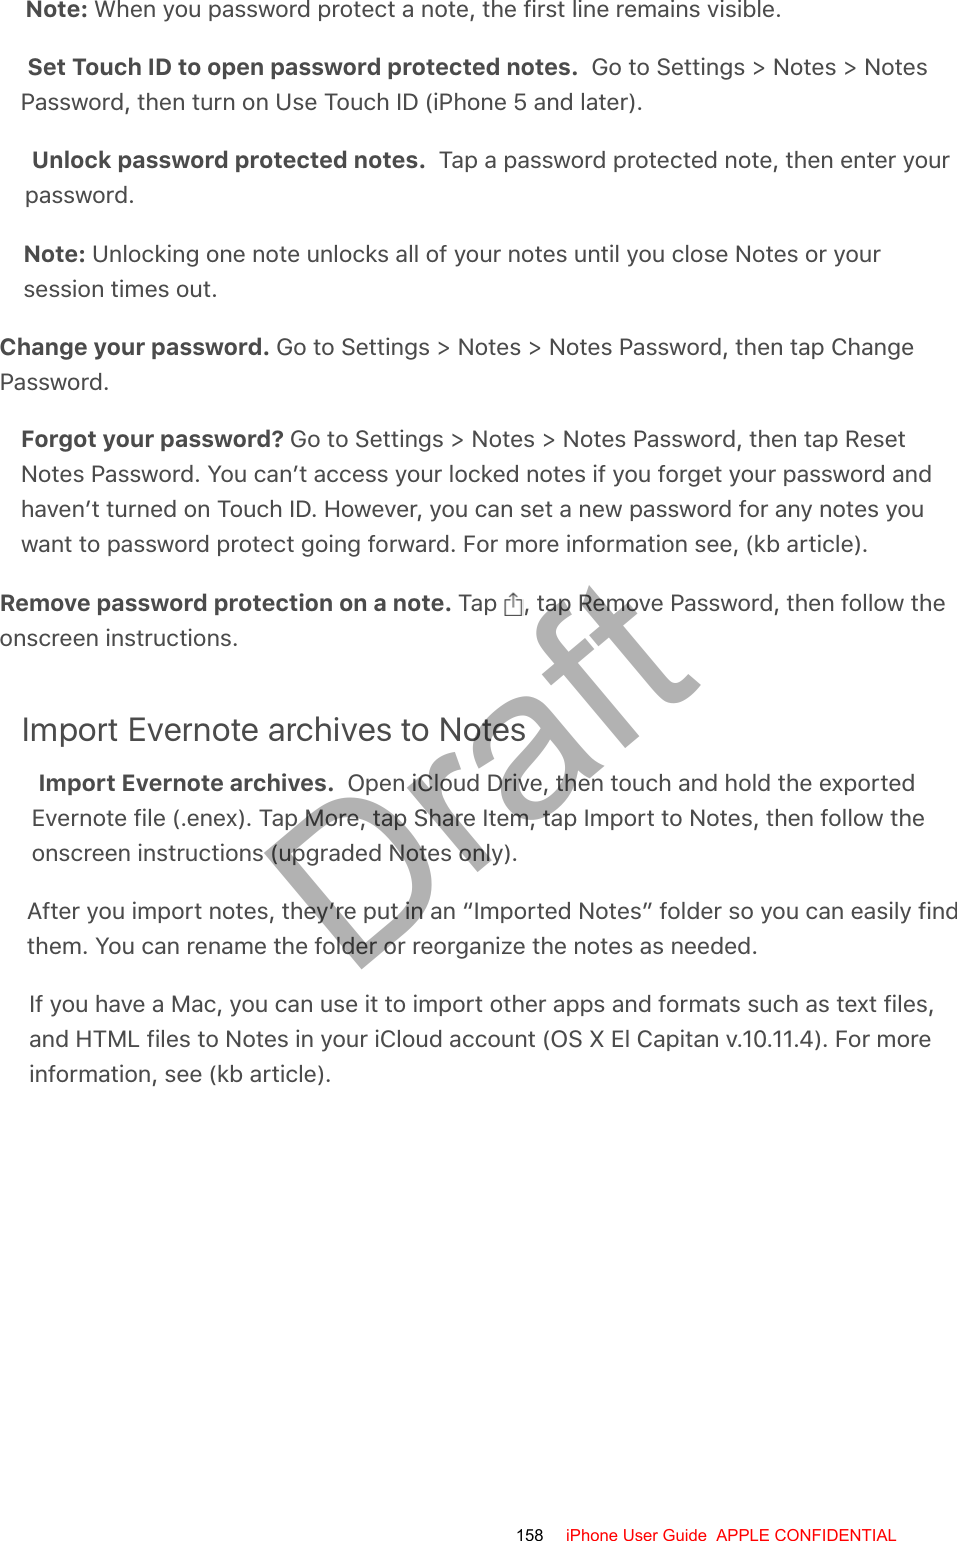 Note: When you password protect a note, the first line remains visible.Set Touch ID to open password protected notes.  Go to Settings &gt; Notes &gt; NotesPassword, then turn on Use Touch ID (iPhone 5 and later).Unlock password protected notes.  Tap a password protected note, then enter yourpassword.Note: Unlocking one note unlocks all of your notes until you close Notes or yoursession times out.Change your password. Go to Settings &gt; Notes &gt; Notes Password, then tap ChangePassword.Forgot your password? Go to Settings &gt; Notes &gt; Notes Password, then tap ResetNotes Password. You can’t access your locked notes if you forget your password andhaven’t turned on Touch ID. However, you can set a new password for any notes youwant to password protect going forward. For more information see, (kb article).Remove password protection on a note. Tap  , tap Remove Password, then follow theonscreen instructions.Import Evernote archives to NotesImport Evernote archives.  Open iCloud Drive, then touch and hold the exportedEvernote file (.enex). Tap More, tap Share Item, tap Import to Notes, then follow theonscreen instructions (upgraded Notes only).After you import notes, they’re put in an “Imported Notes” folder so you can easily findthem. You can rename the folder or reorganize the notes as needed.If you have a Mac, you can use it to import other apps and formats such as text files,and HTML files to Notes in your iCloud account (OS X El Capitan v.10.11.4). For moreinformation, see (kb article).158 iPhone User Guide  APPLE CONFIDENTIALDraft